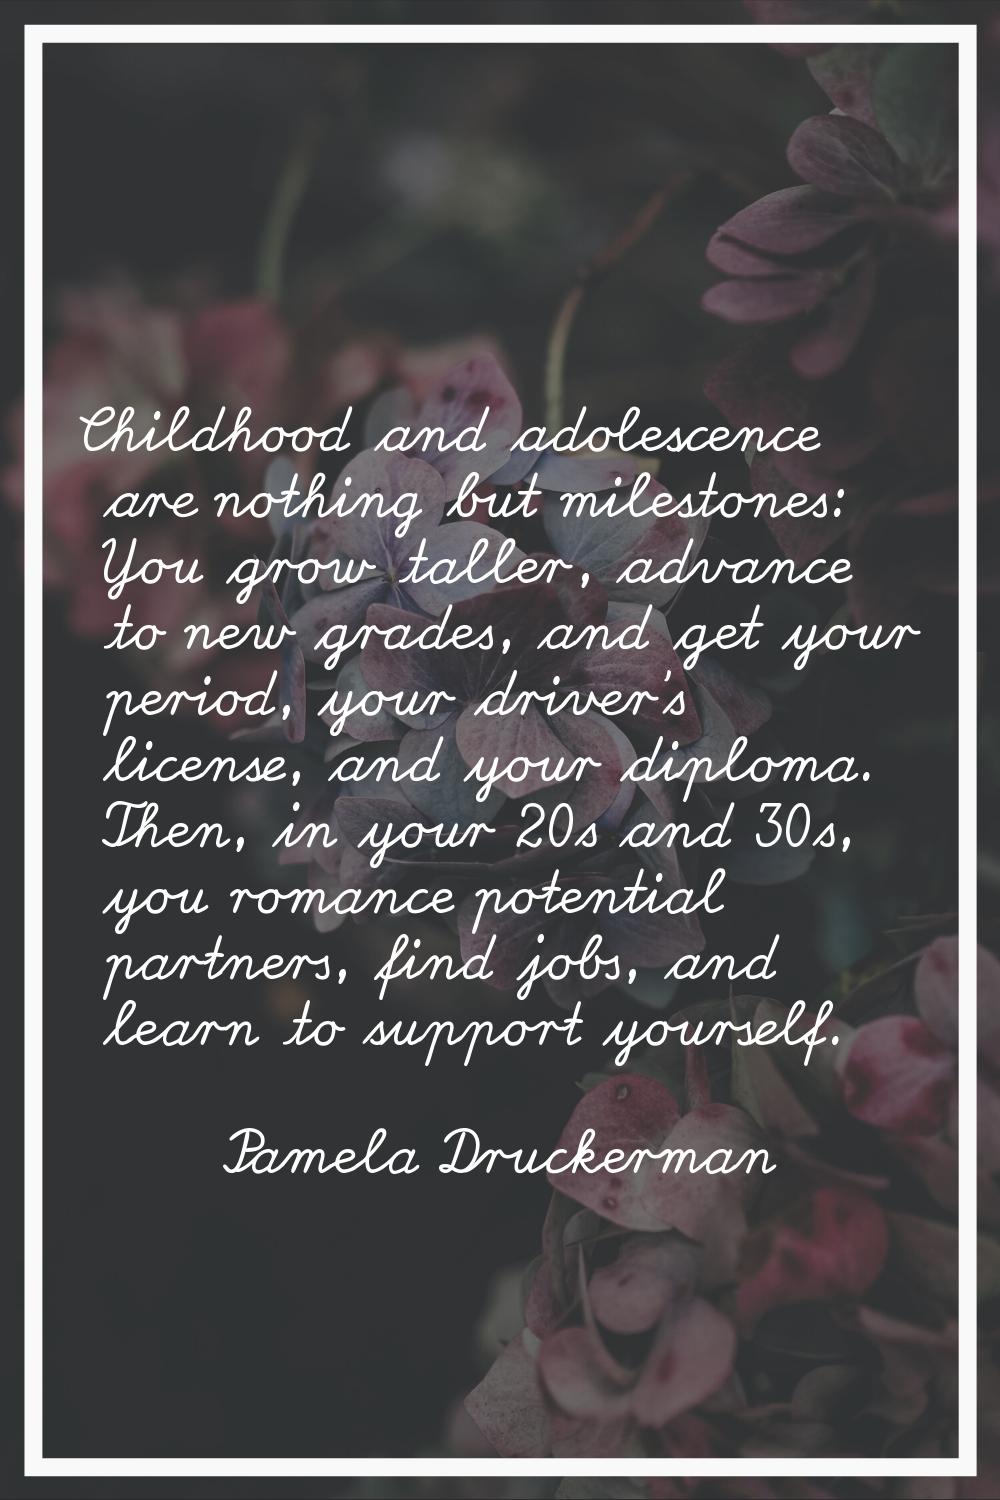 Childhood and adolescence are nothing but milestones: You grow taller, advance to new grades, and g